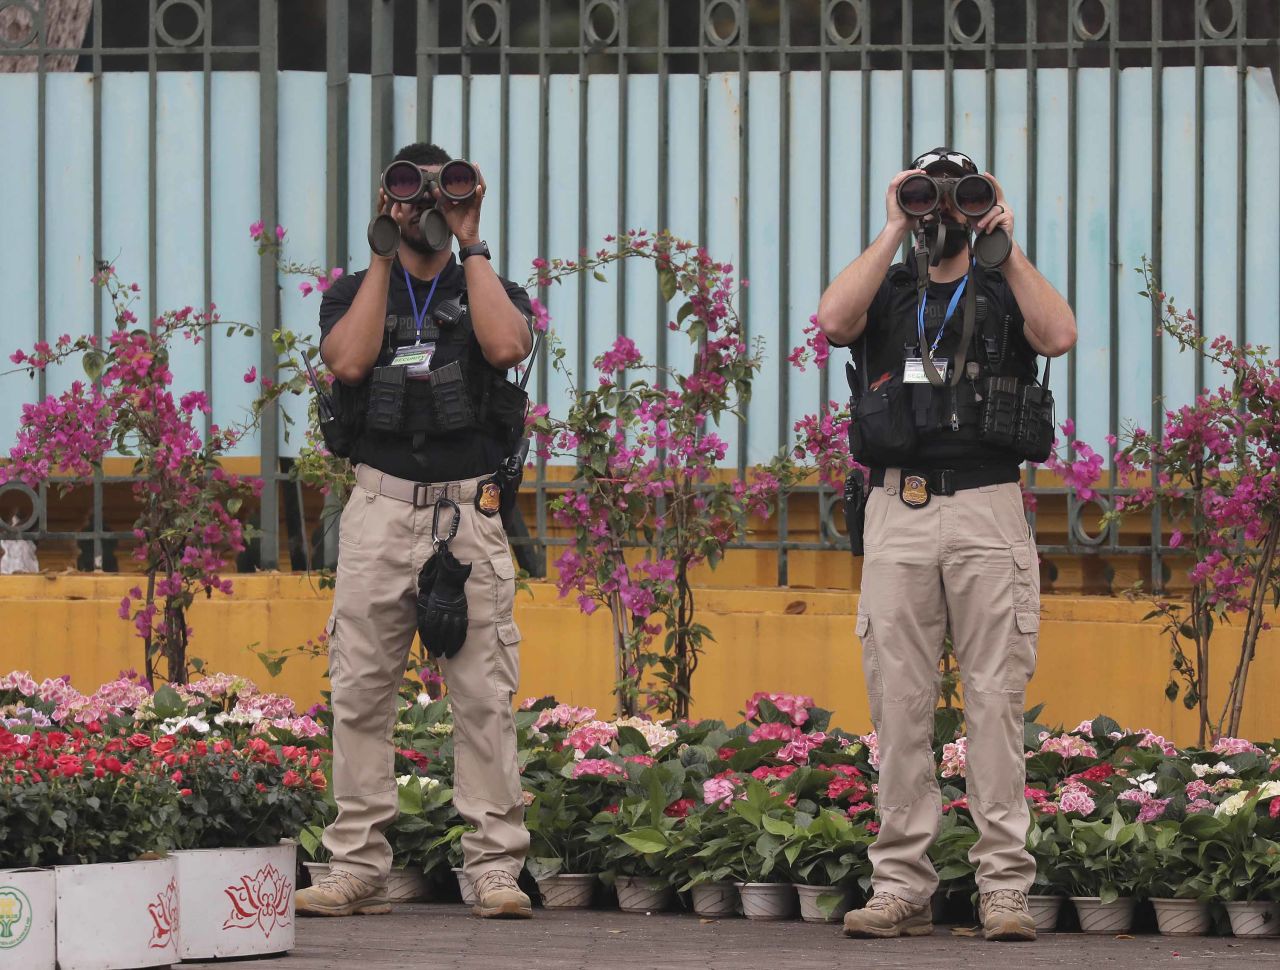 US security officers scan the area outside the Presidential Palace before Trump met with Vietnamese leaders.